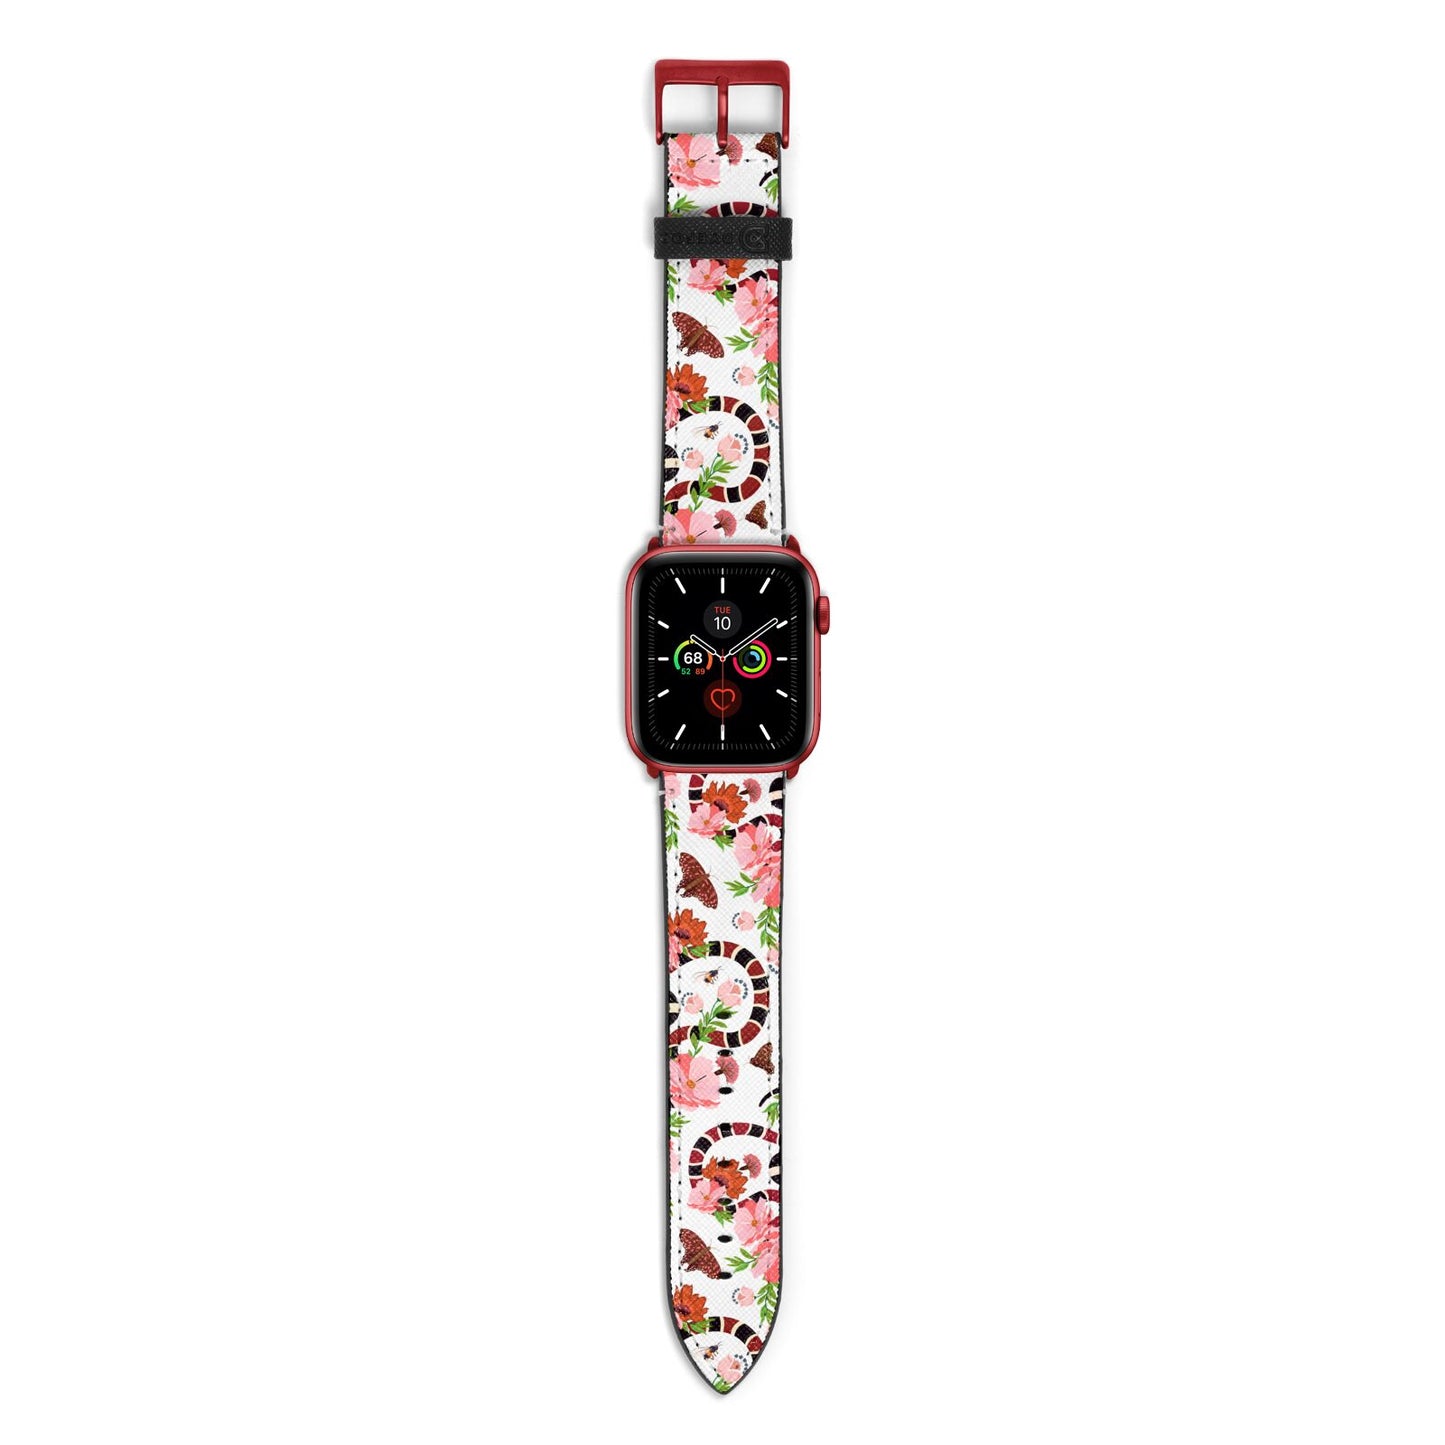 Floral Snake Apple Watch Strap with Red Hardware